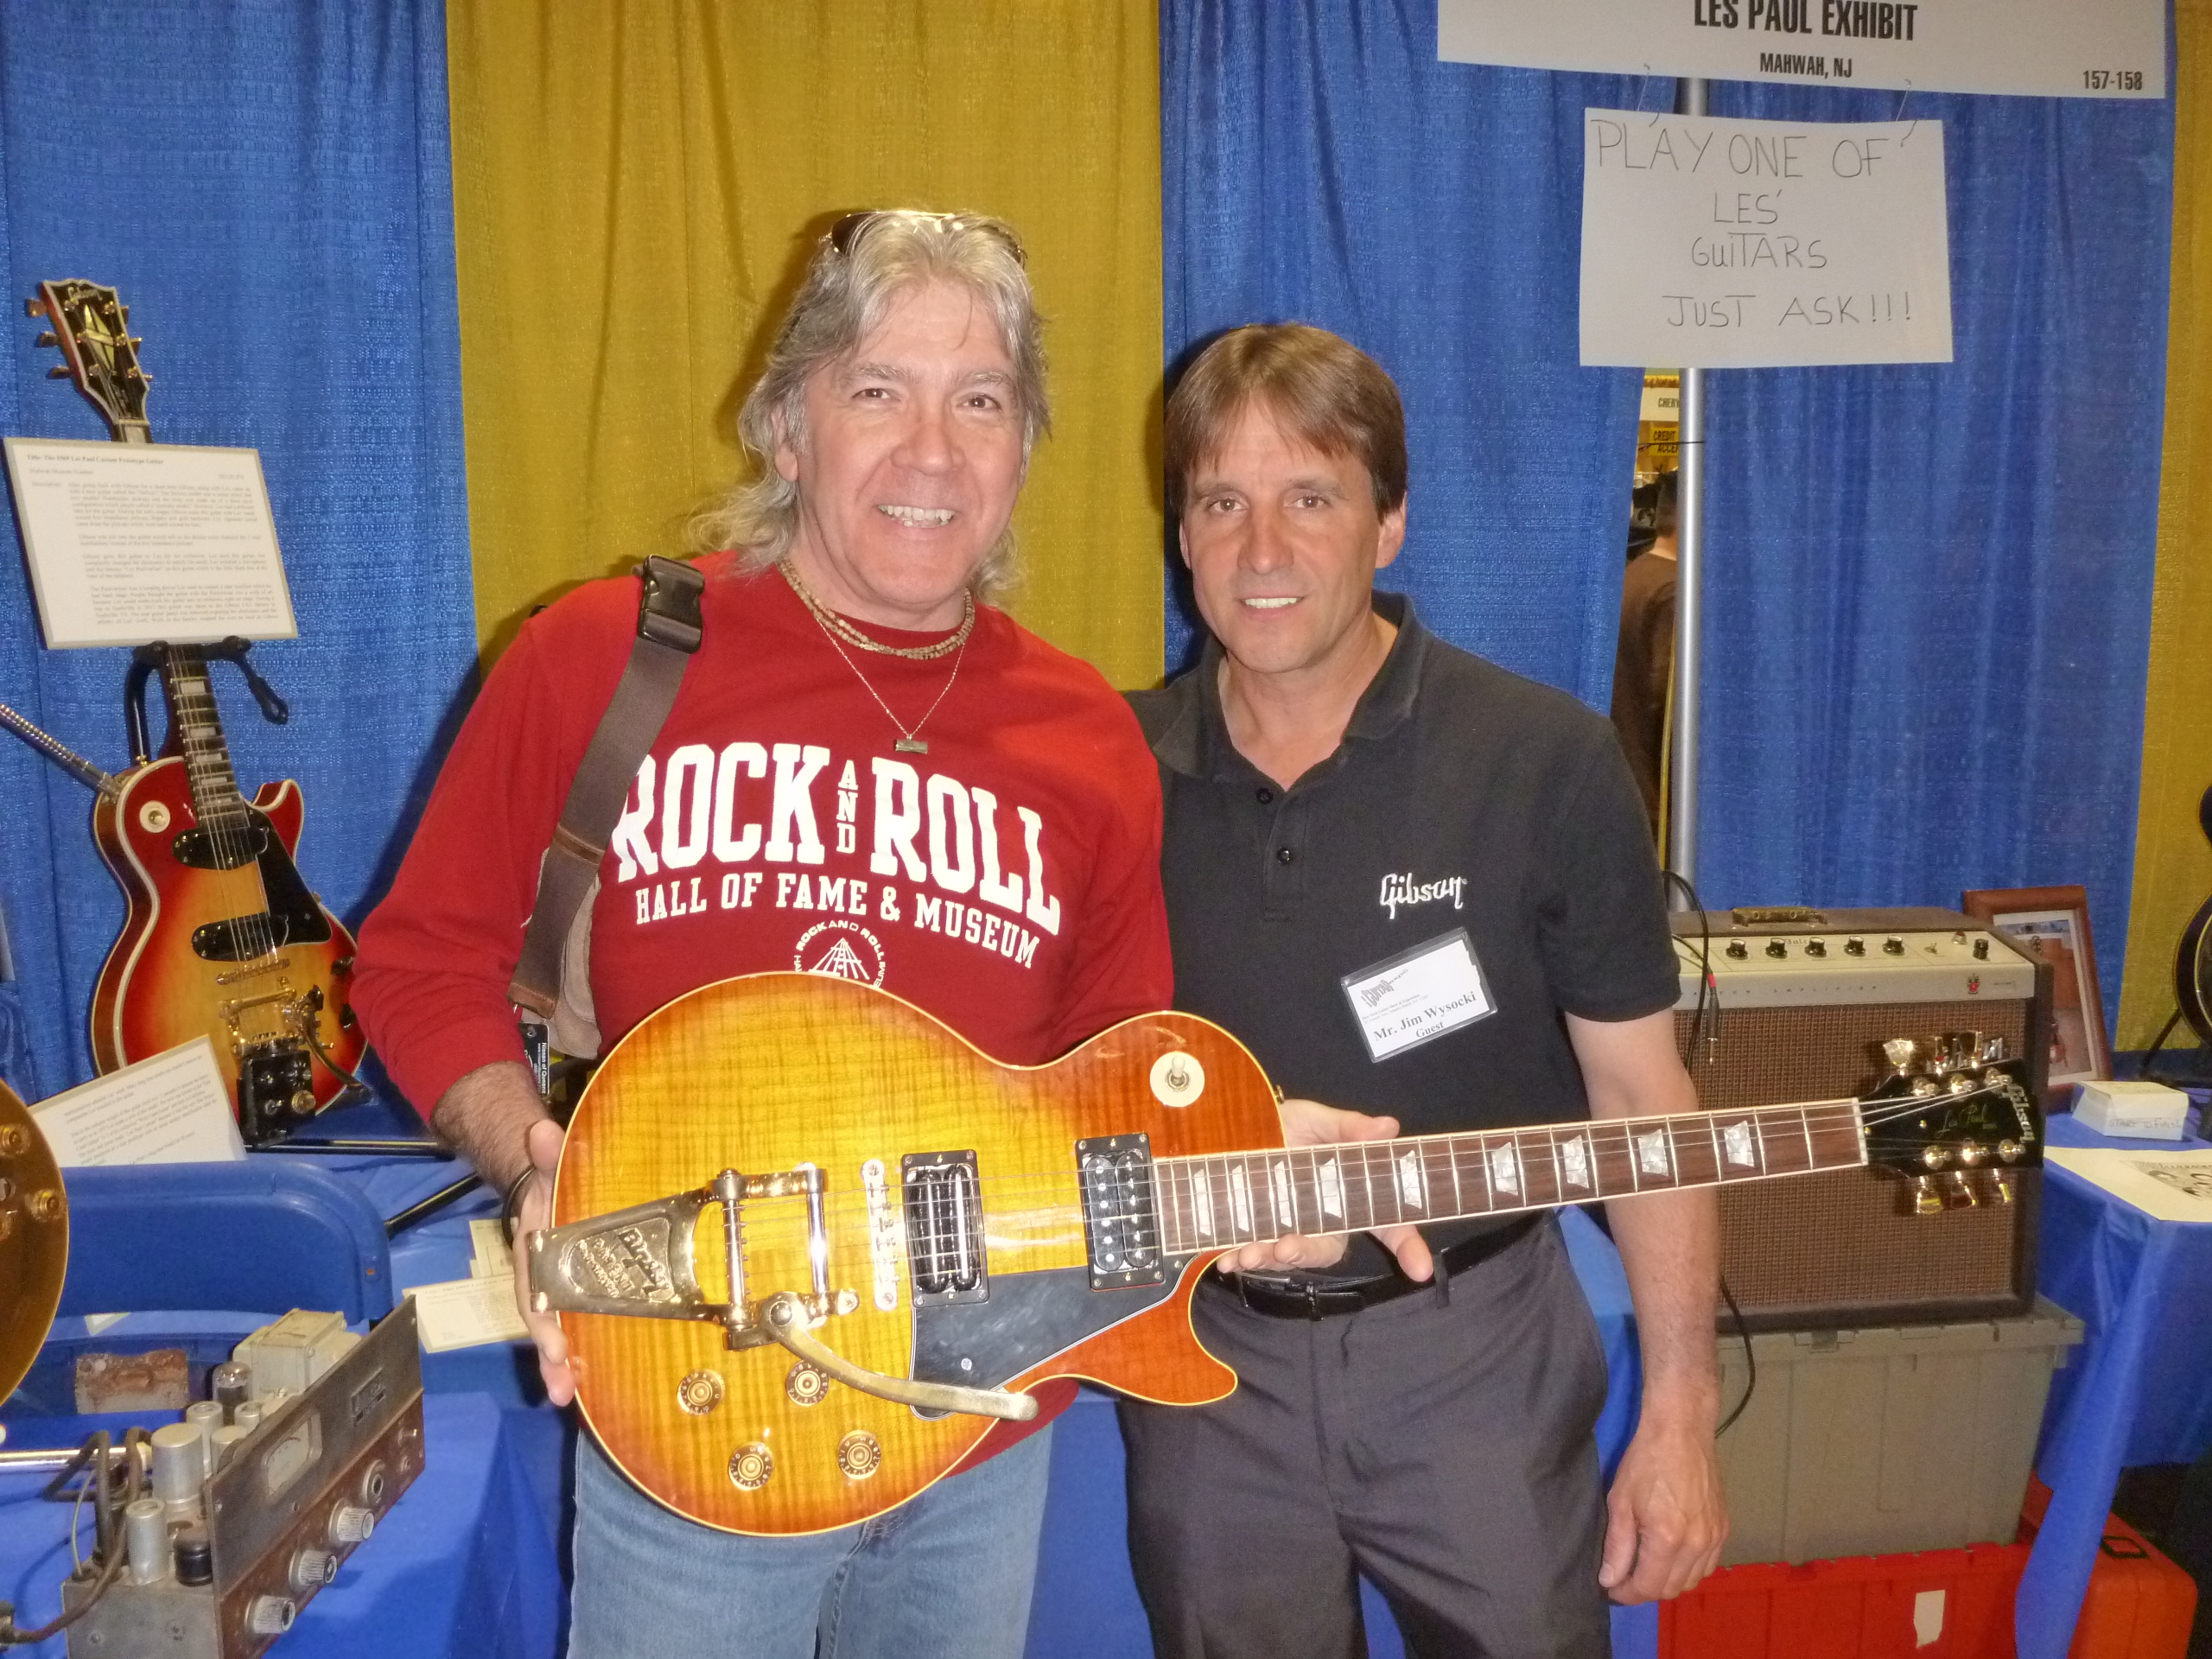 Famed musician Godfrey Townsend & the Les Paul Exhibit's own Jim Wysocki share a smile at the NY Guitar Show.